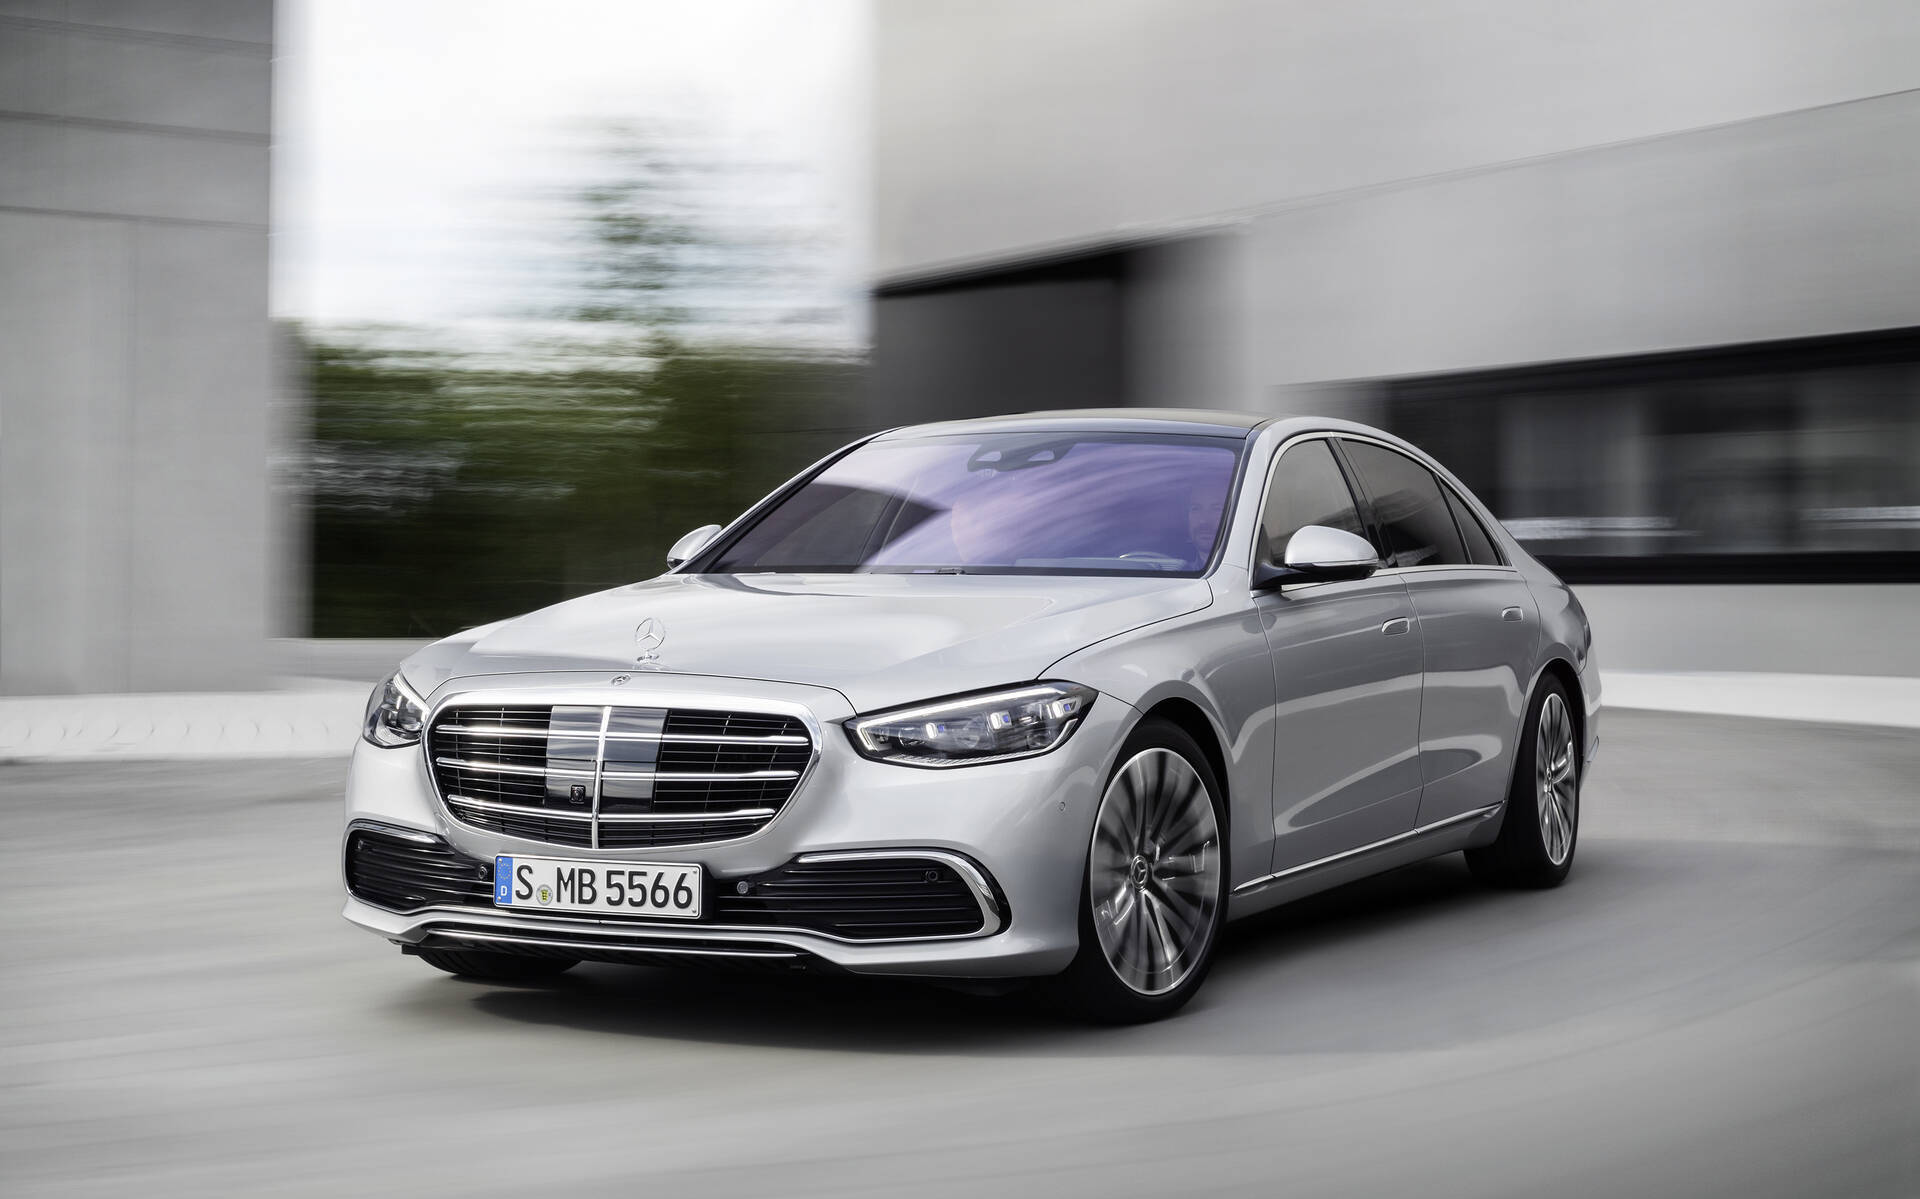 21 Mercedes Benz S Class News Reviews Picture Galleries And Videos The Car Guide